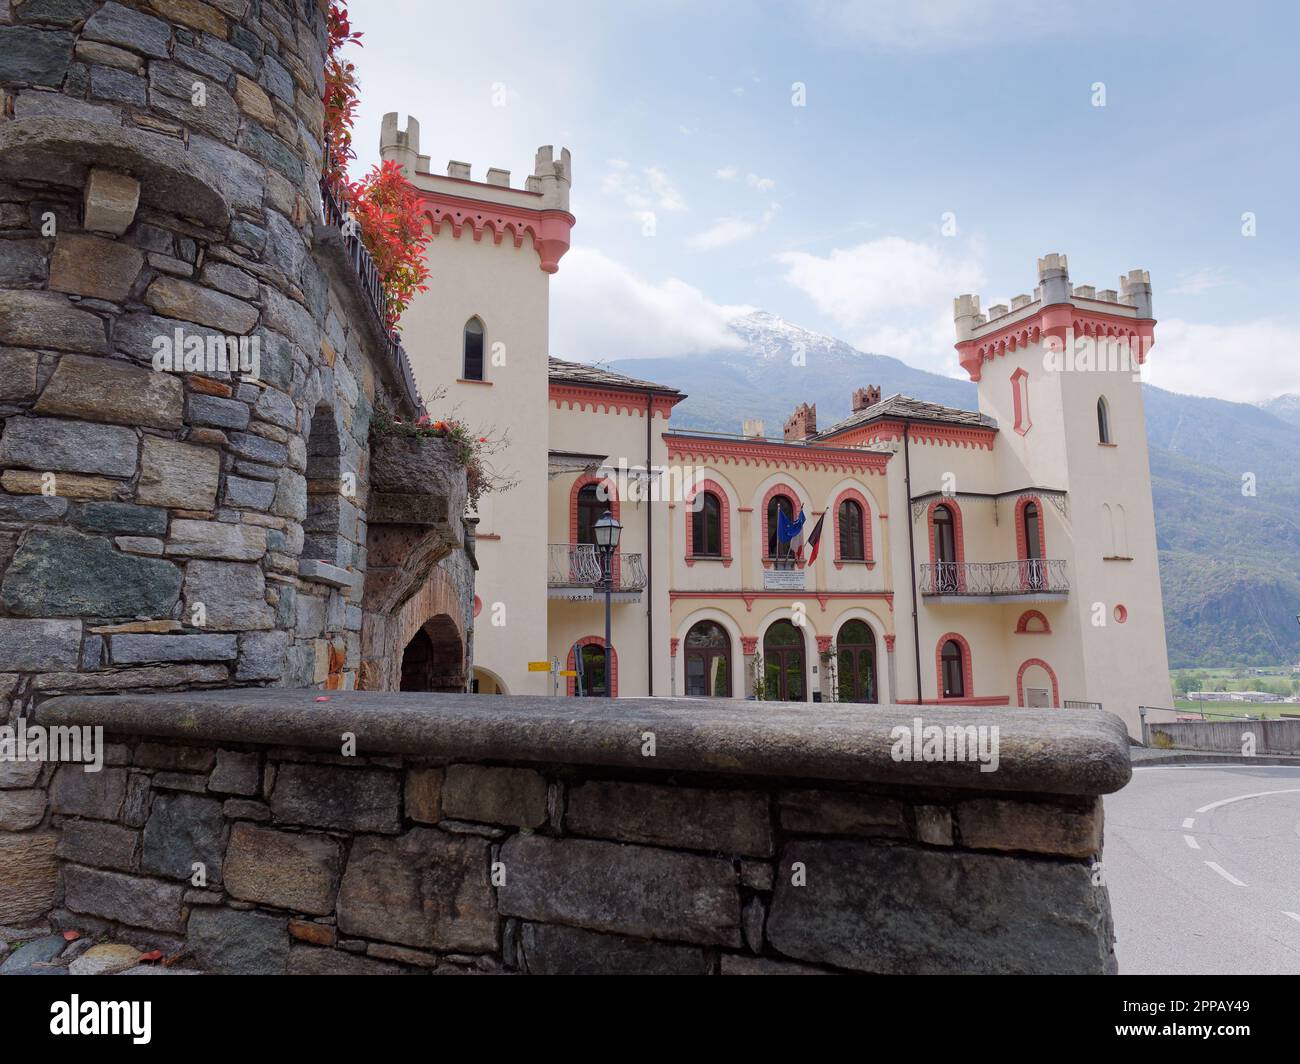 19th Century Baraing Castle in the town of Pont-Saint-Martin, Aosta Valley, NW Italy Stock Photo